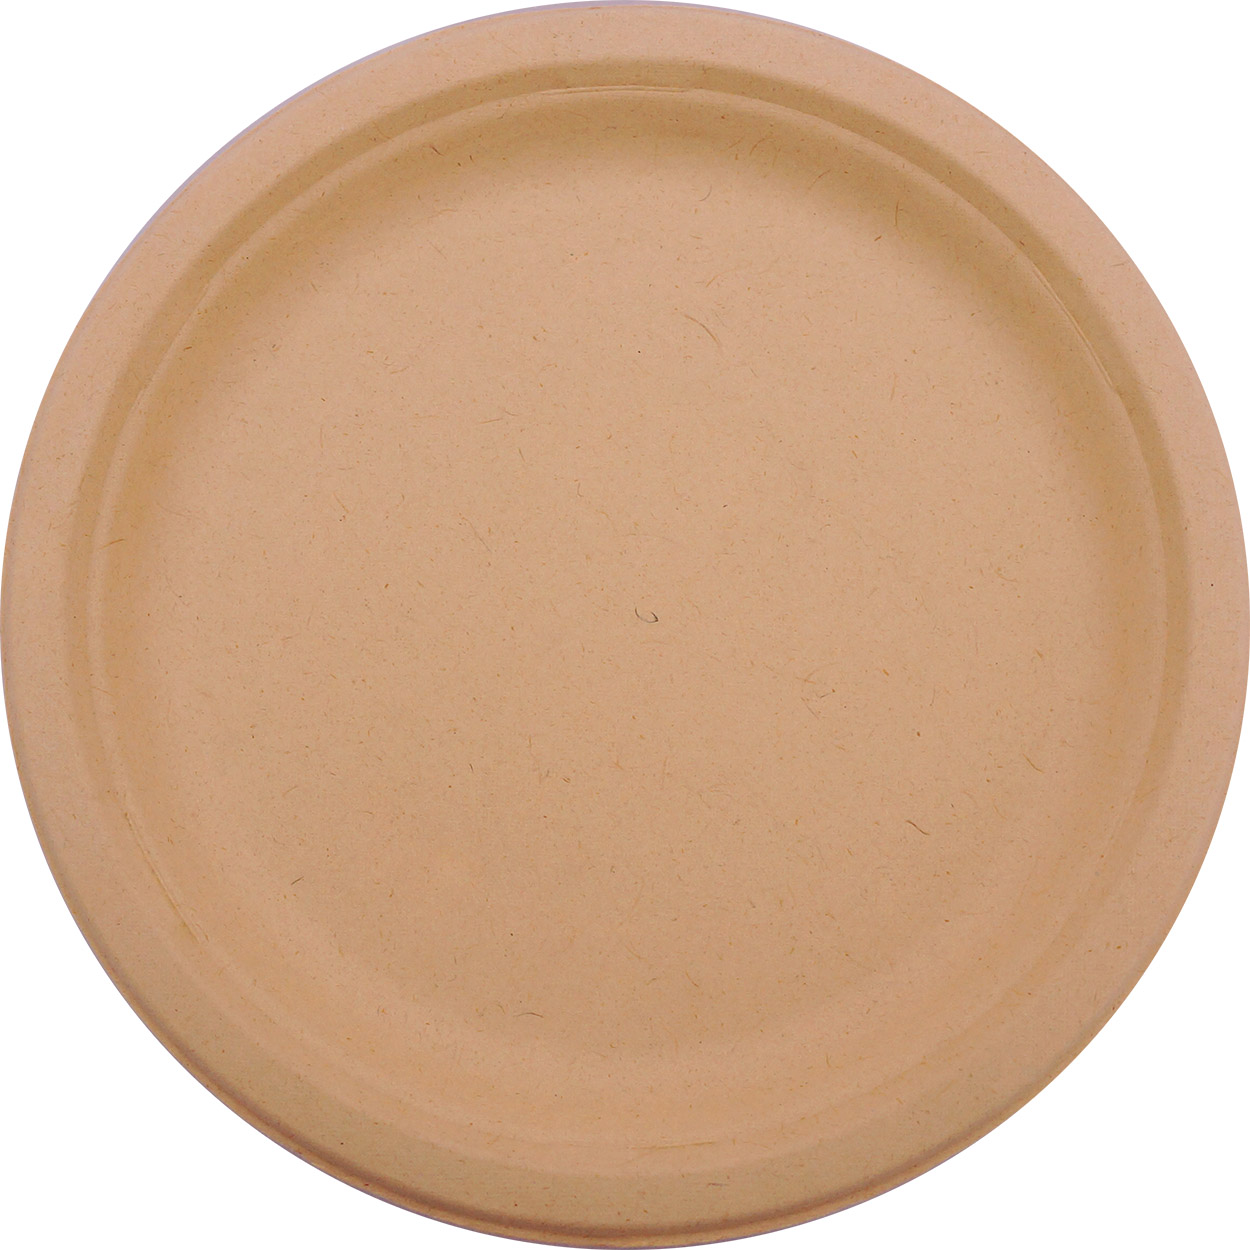 Earthable® Eco-friendly, Ag Fiber 9-inch plate (500 Count)